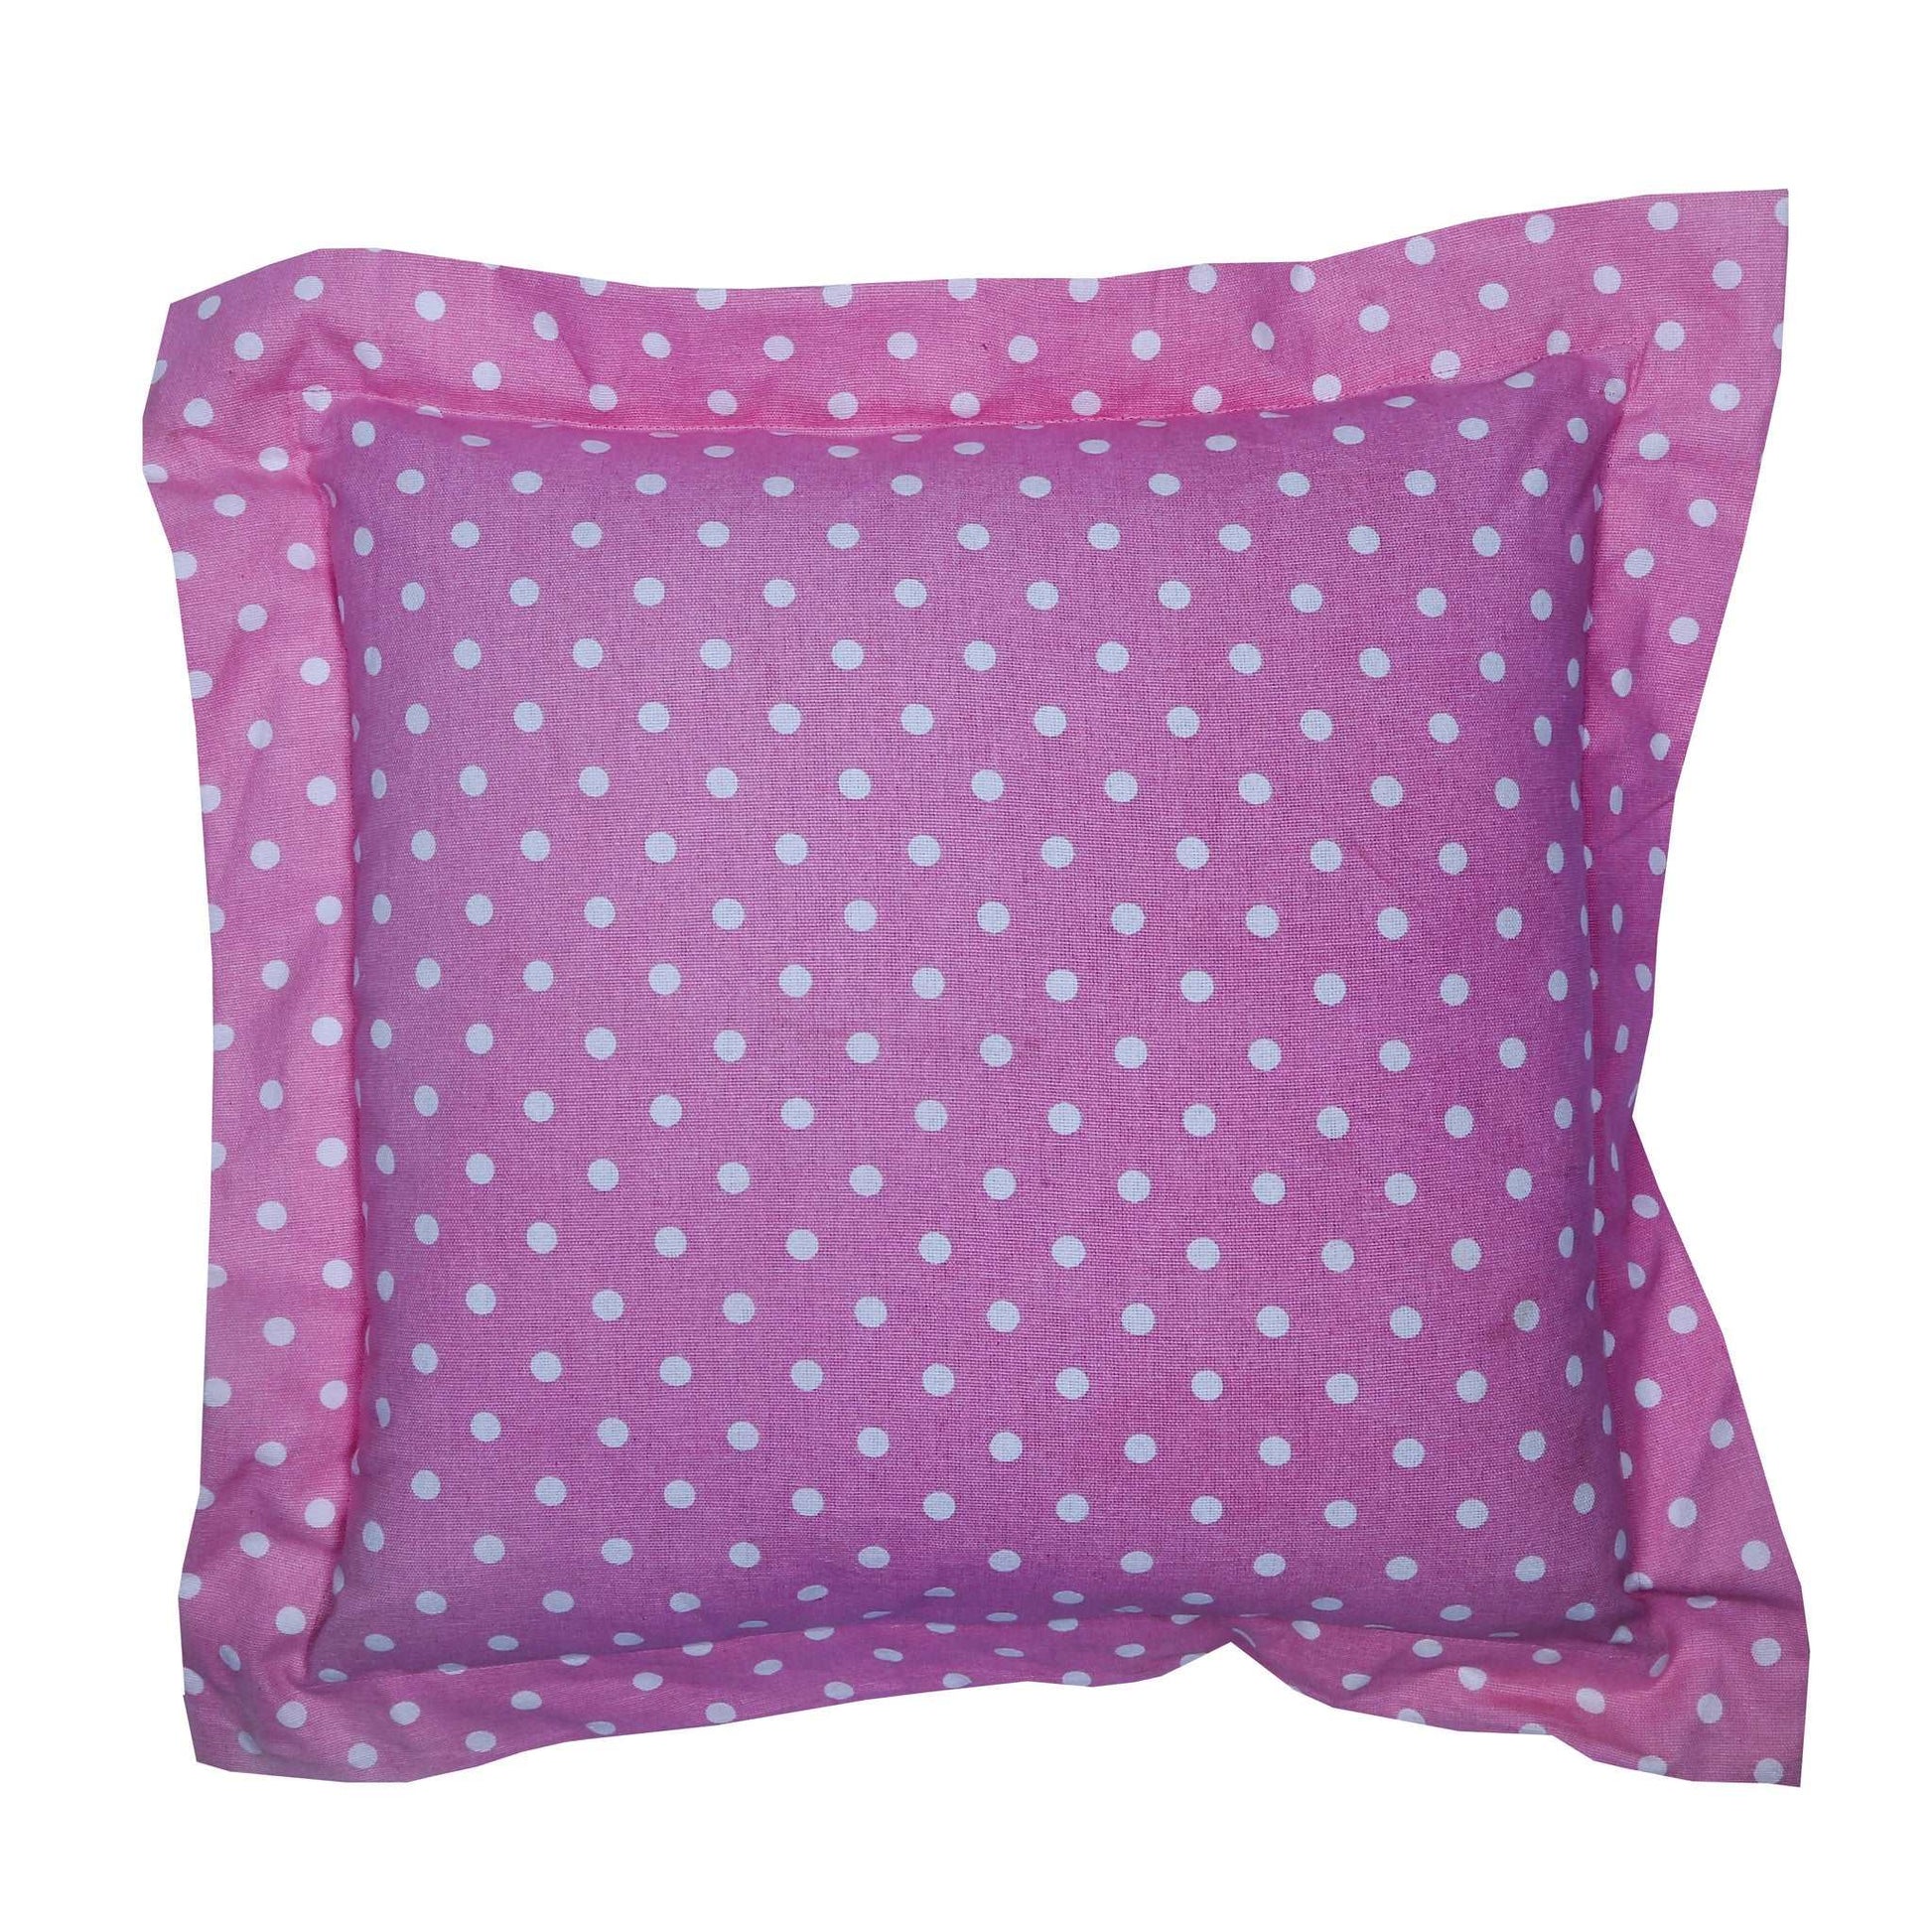 Cushion Cover - Cup Cakes